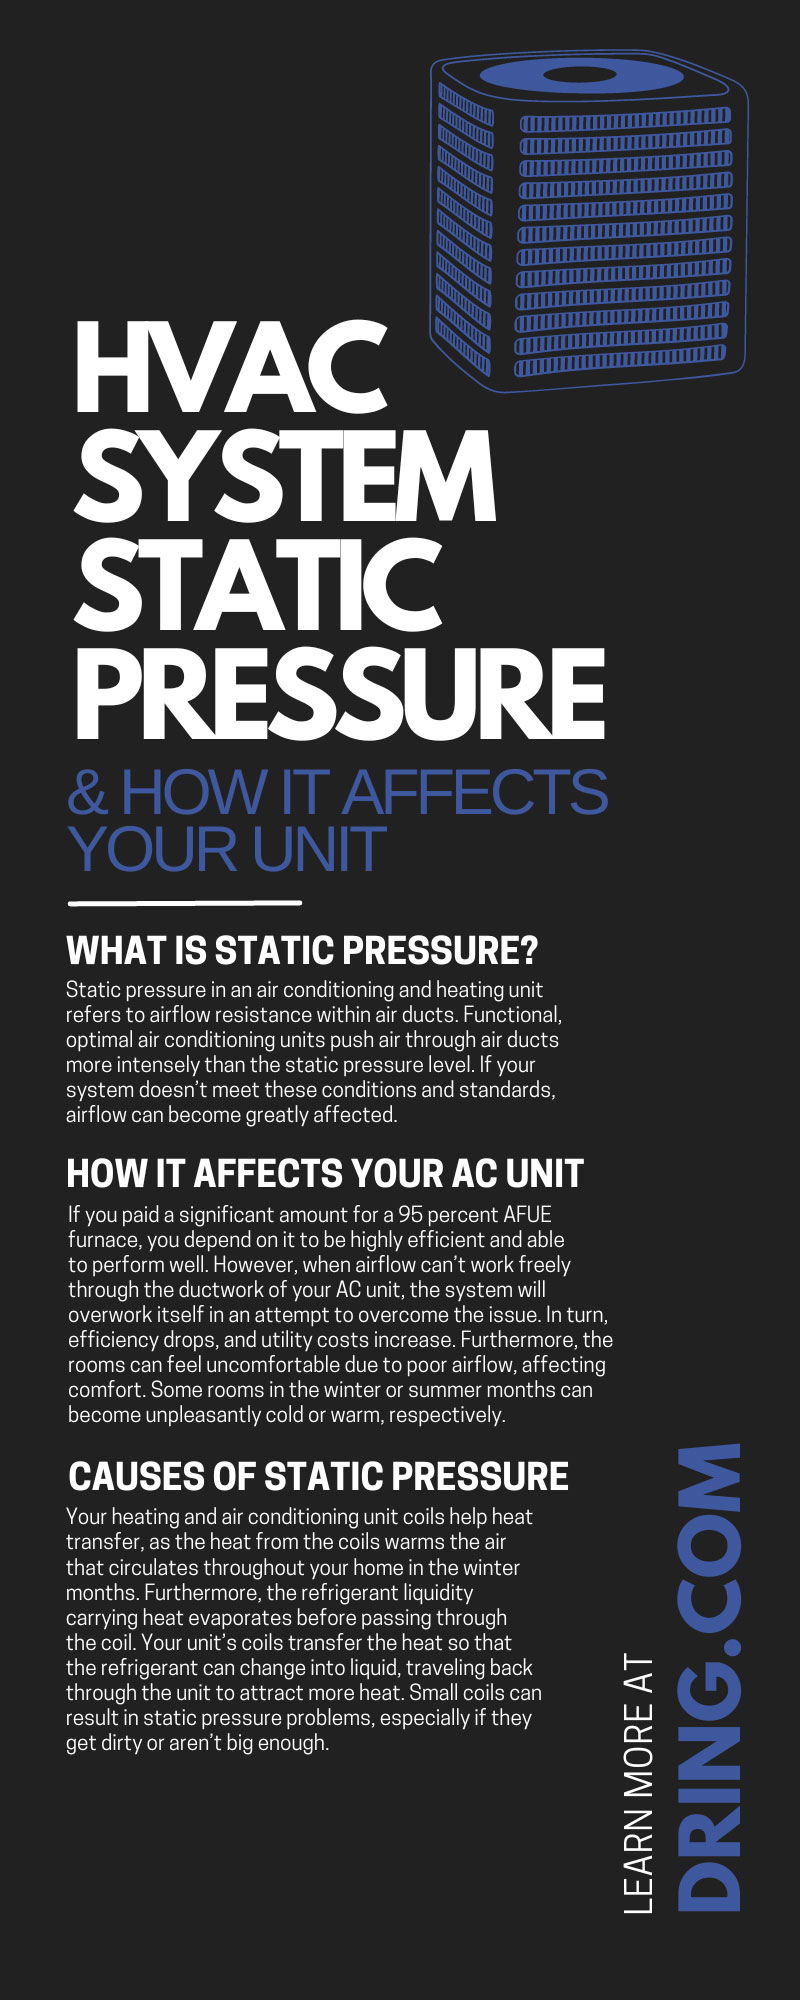 HVAC System Static Pressure & How It Affects Your Unit